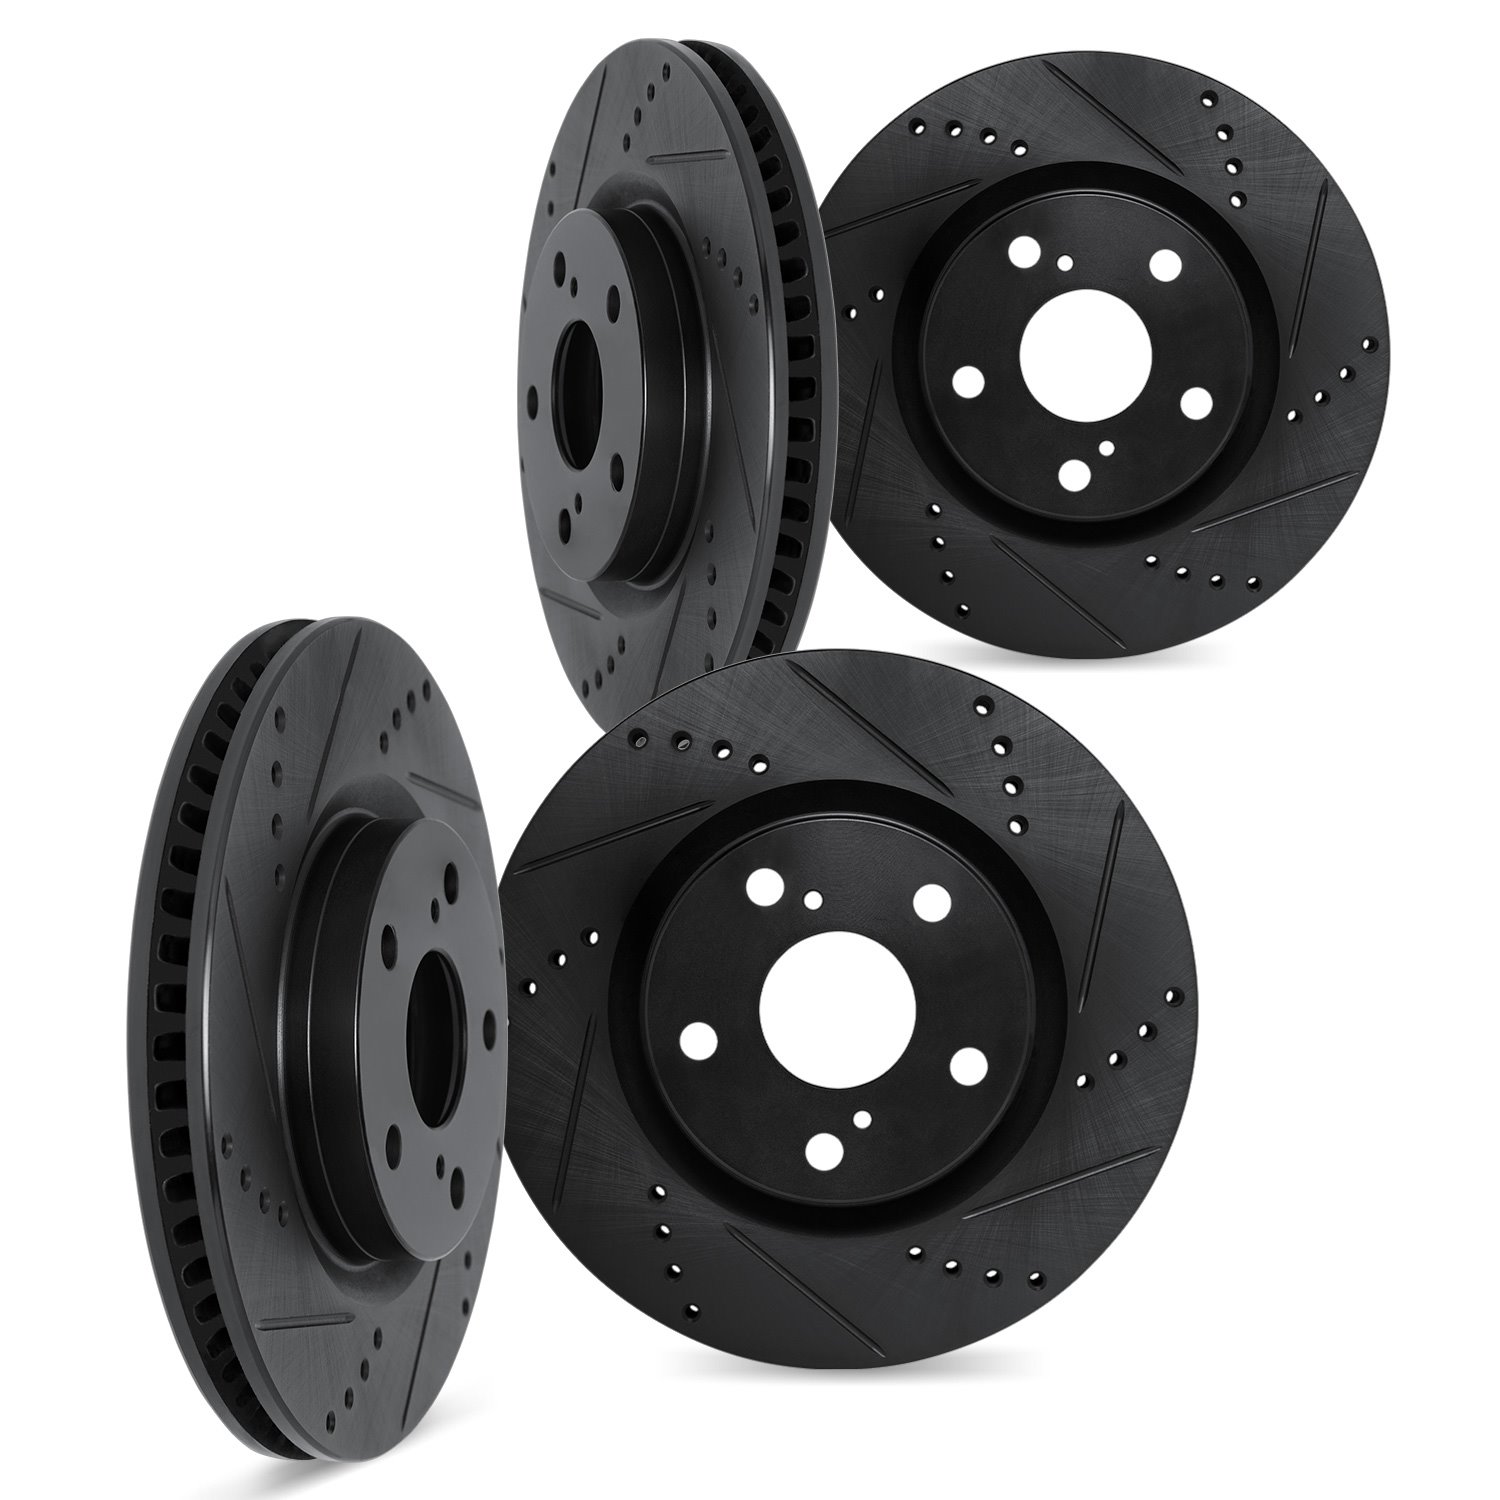 8004-31095 Drilled/Slotted Brake Rotors [Black], 2007-2018 BMW, Position: Front and Rear